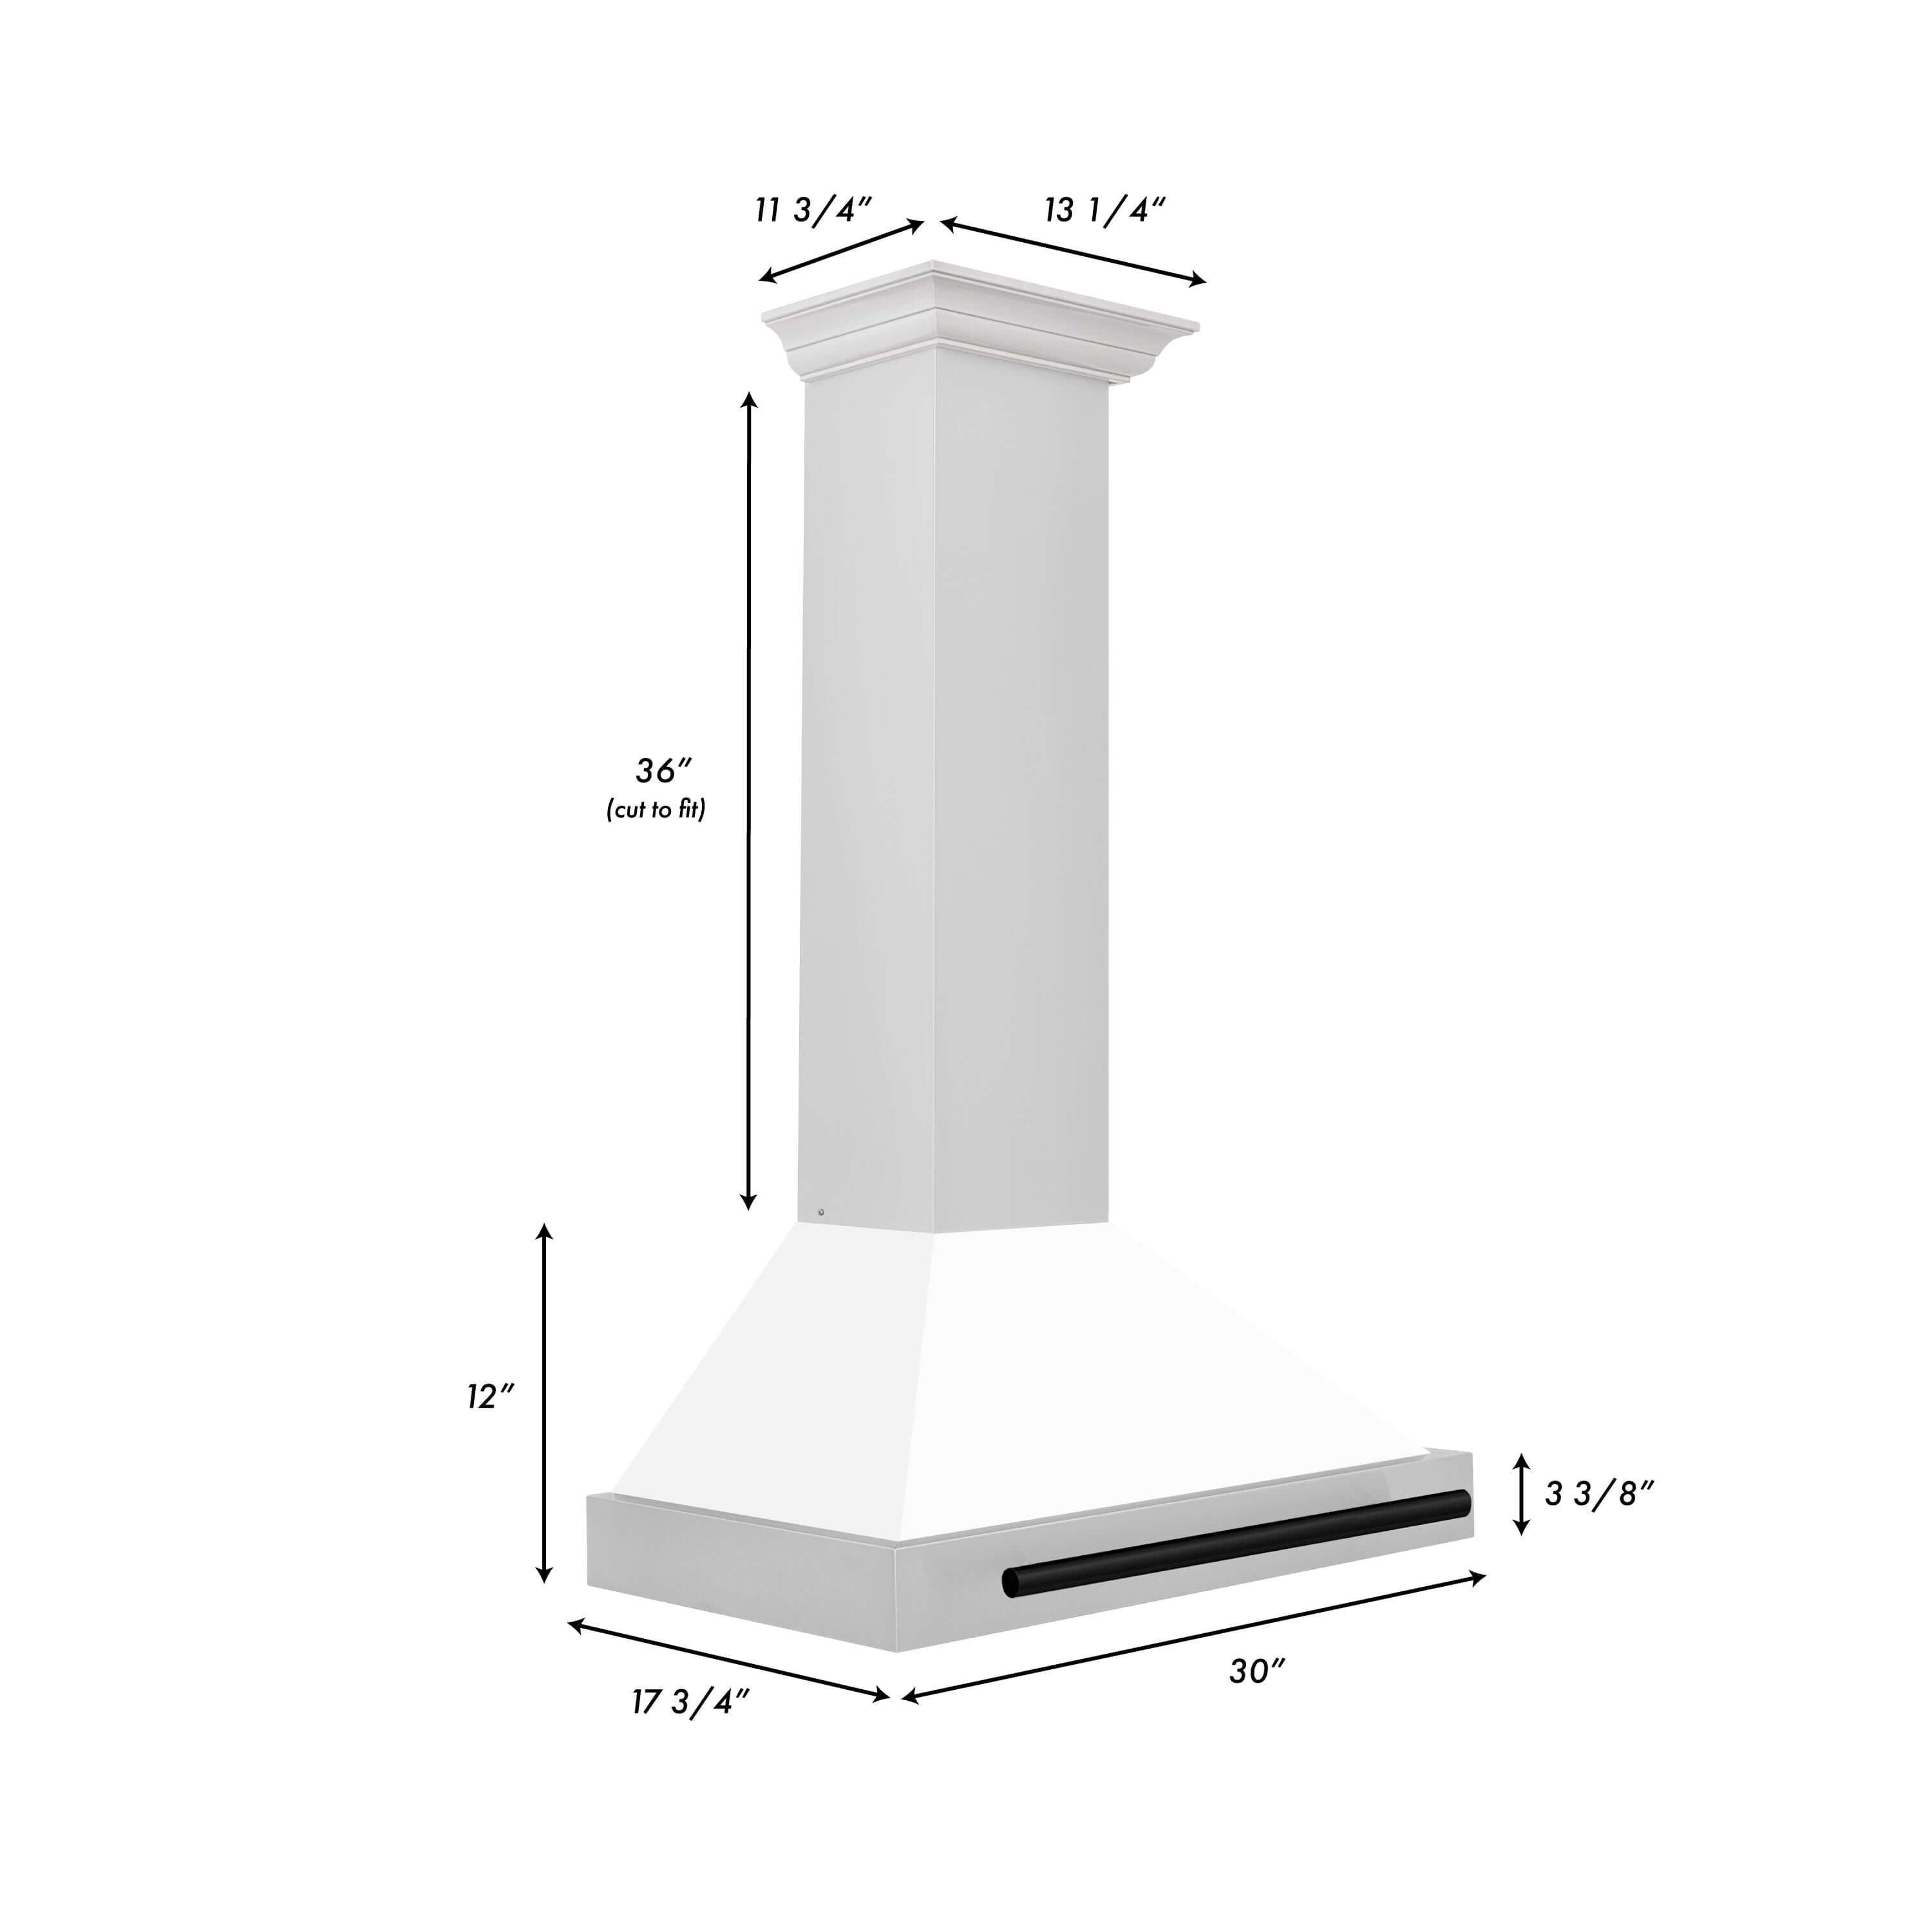 ZLINE Autograph Edition 30 in. Stainless Steel Range Hood with White Matte Shell and Accents (KB4STZ-WM30) dimensional diagram and measurements.